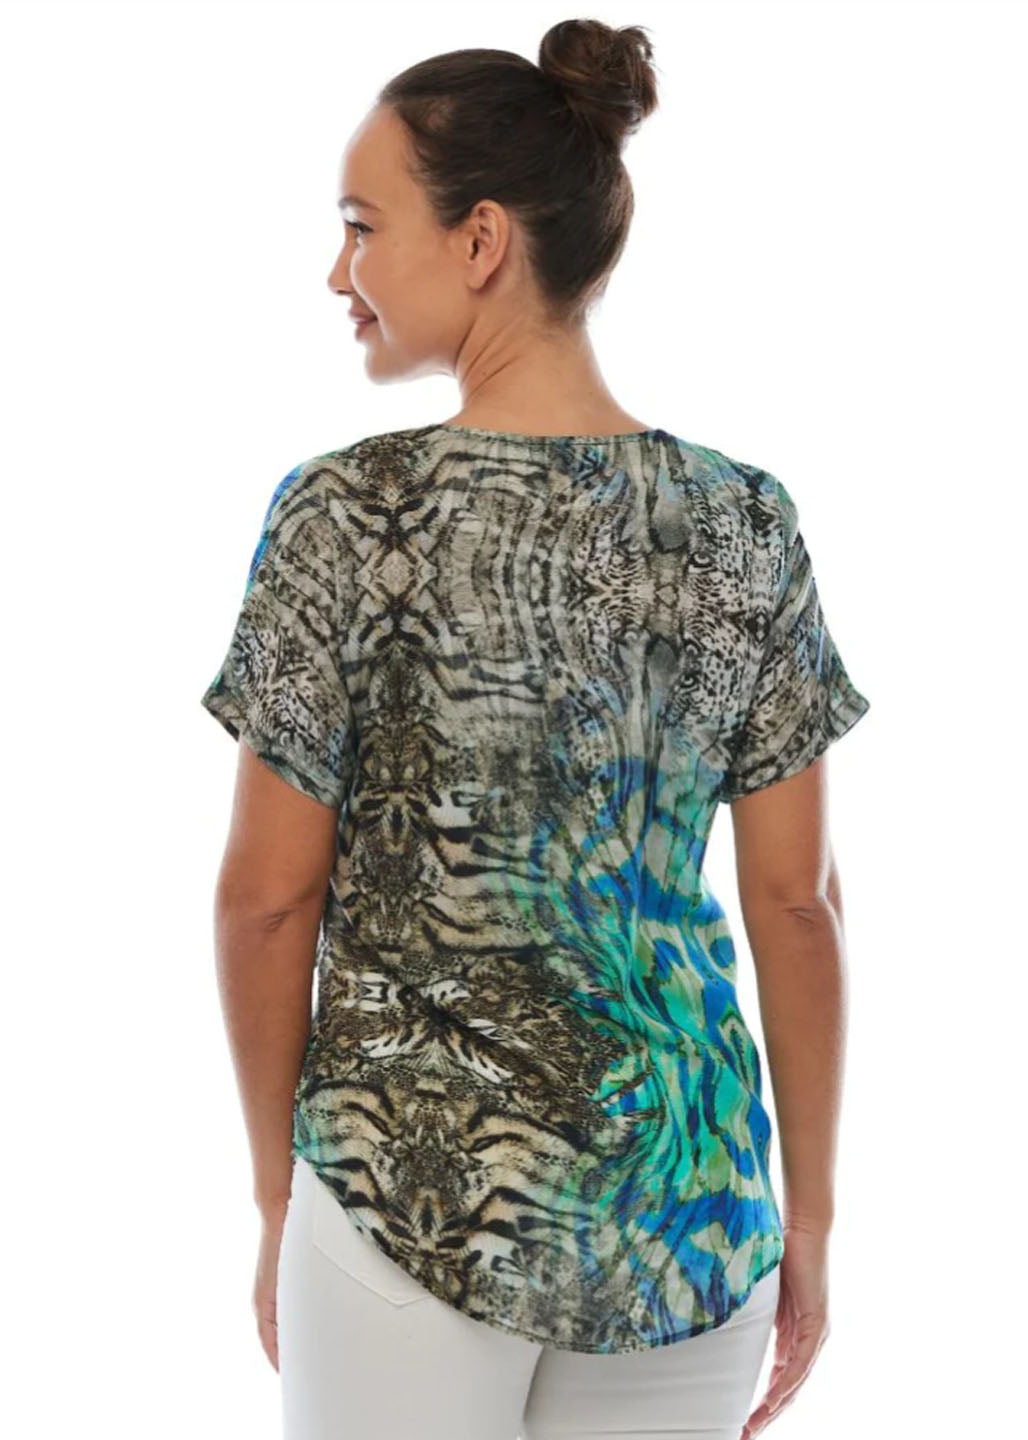 CLAIRE POWELL VISION SHORT SLEEVE TOP